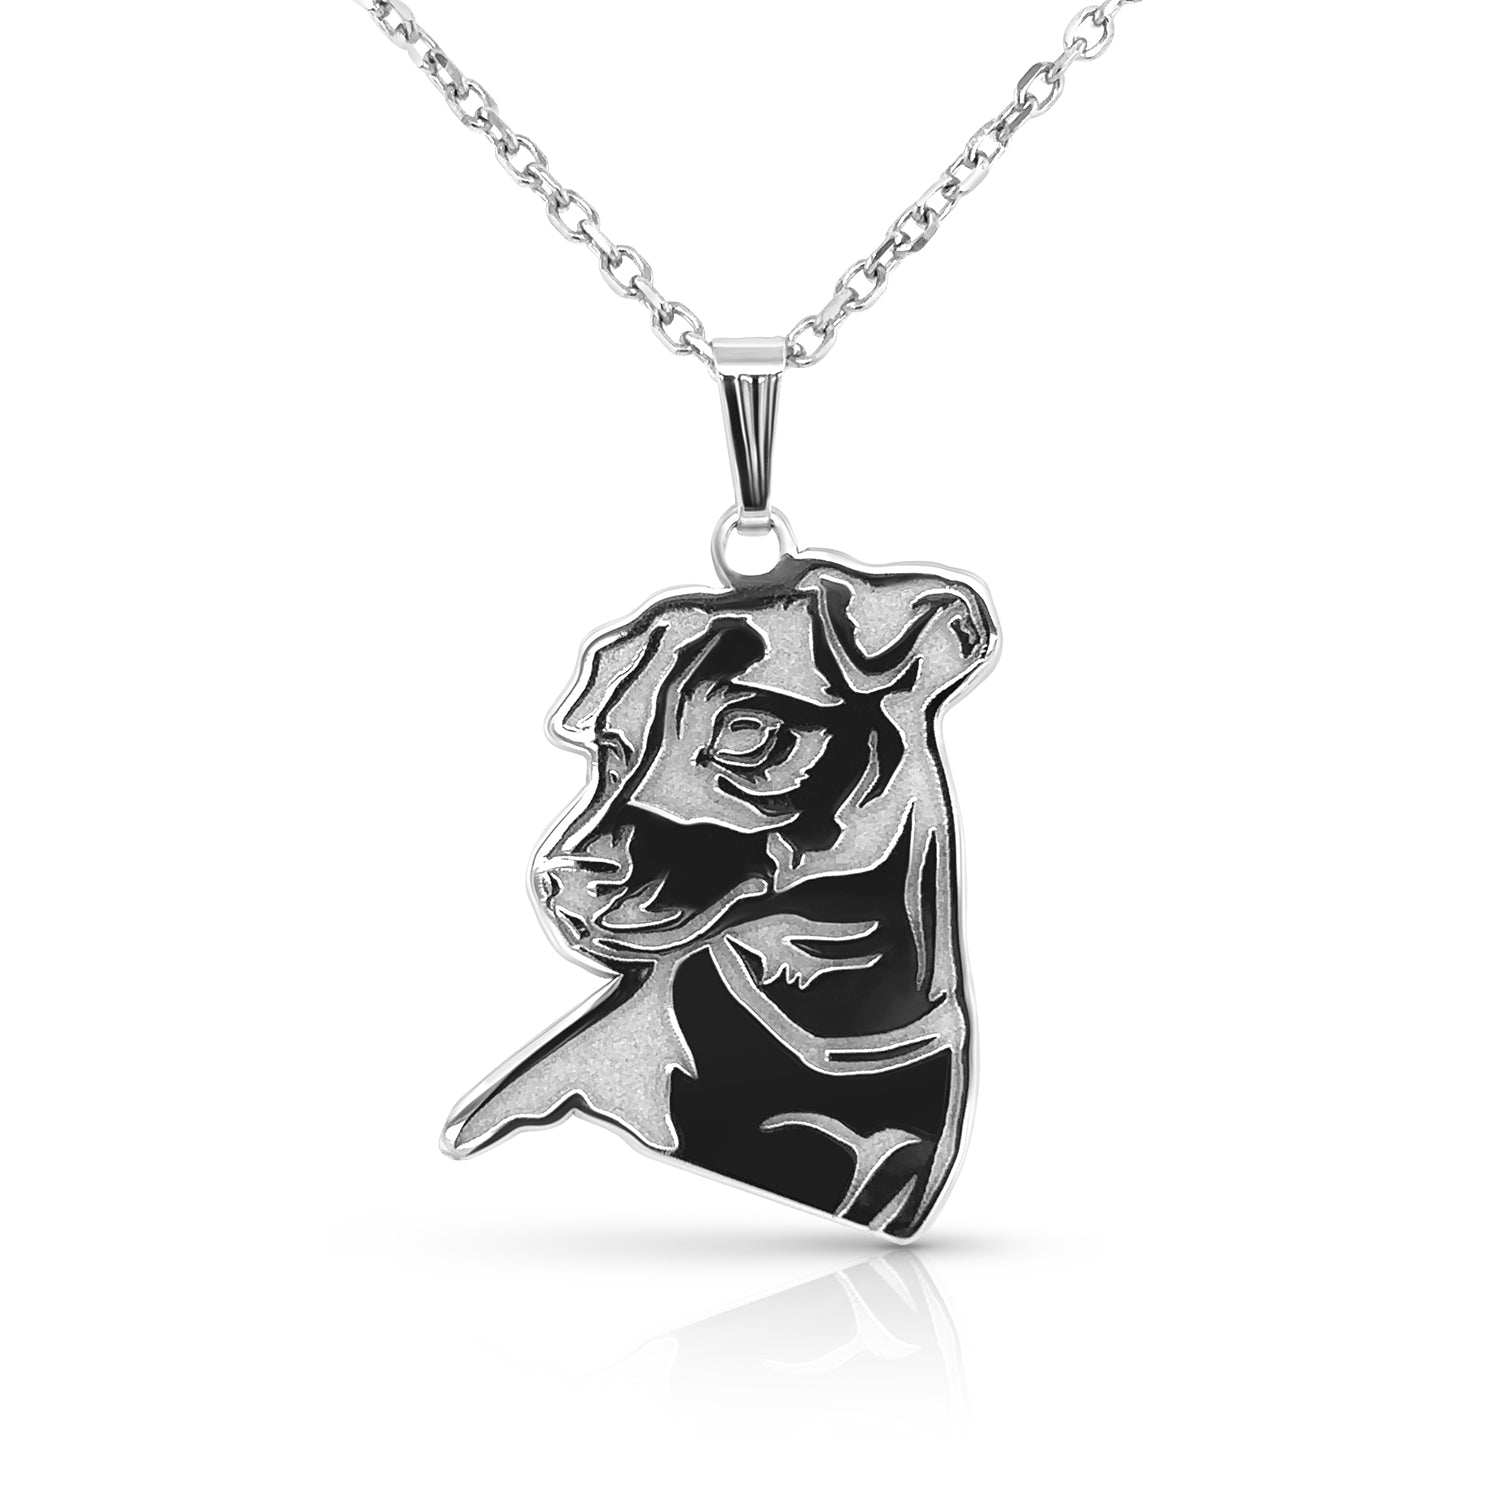 Silver pendant shaped out of a dog's face on a white background